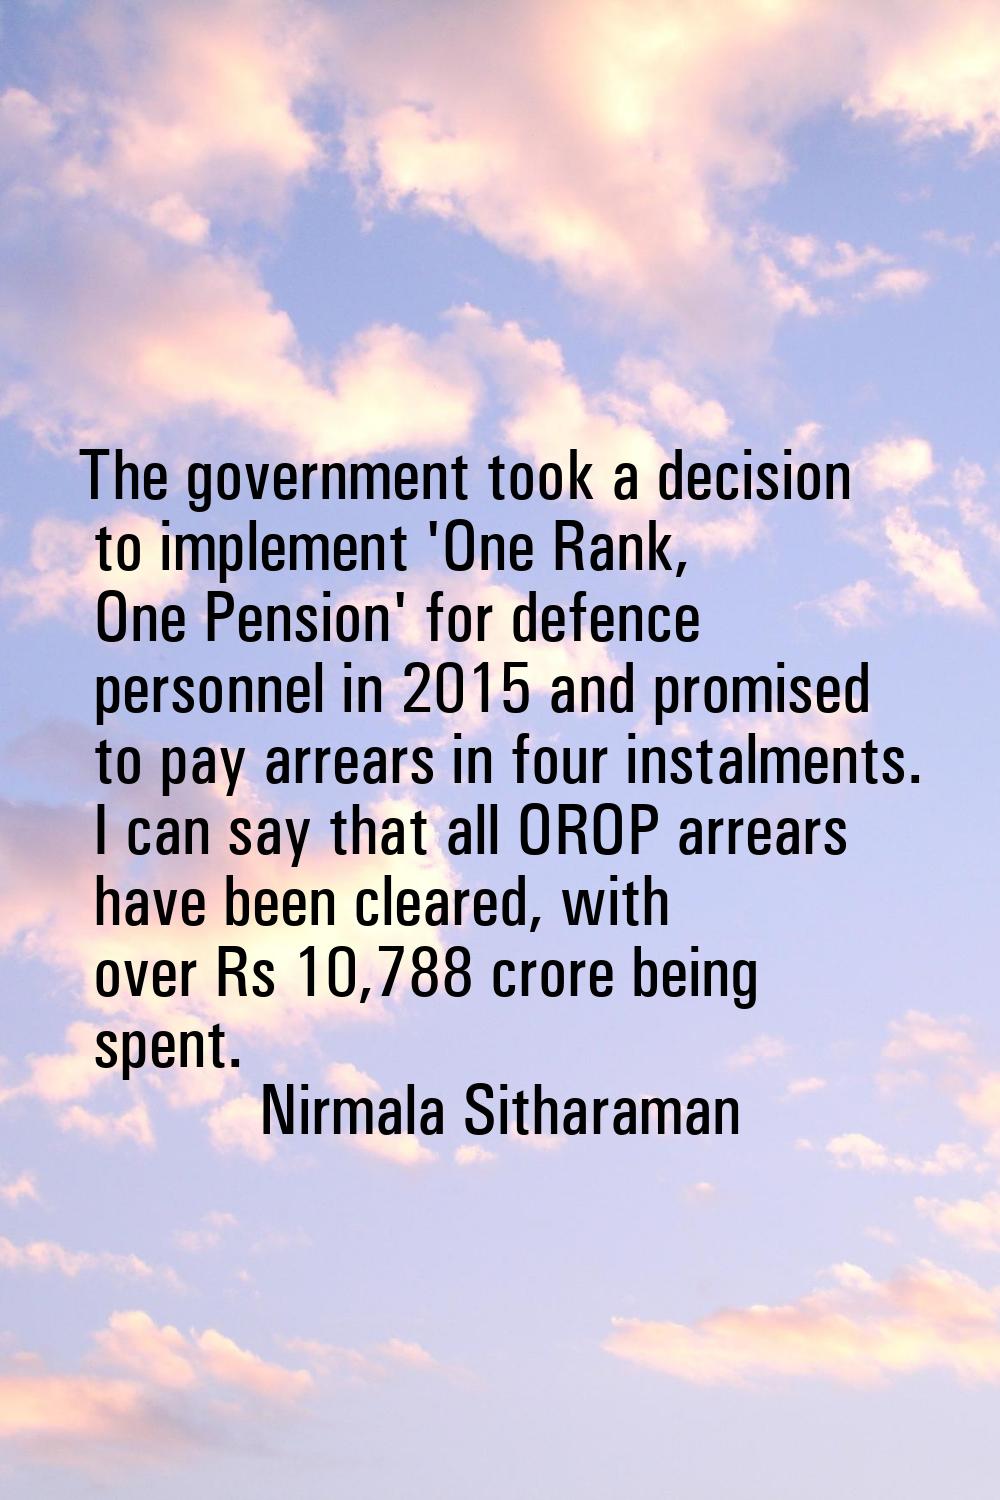 The government took a decision to implement 'One Rank, One Pension' for defence personnel in 2015 a